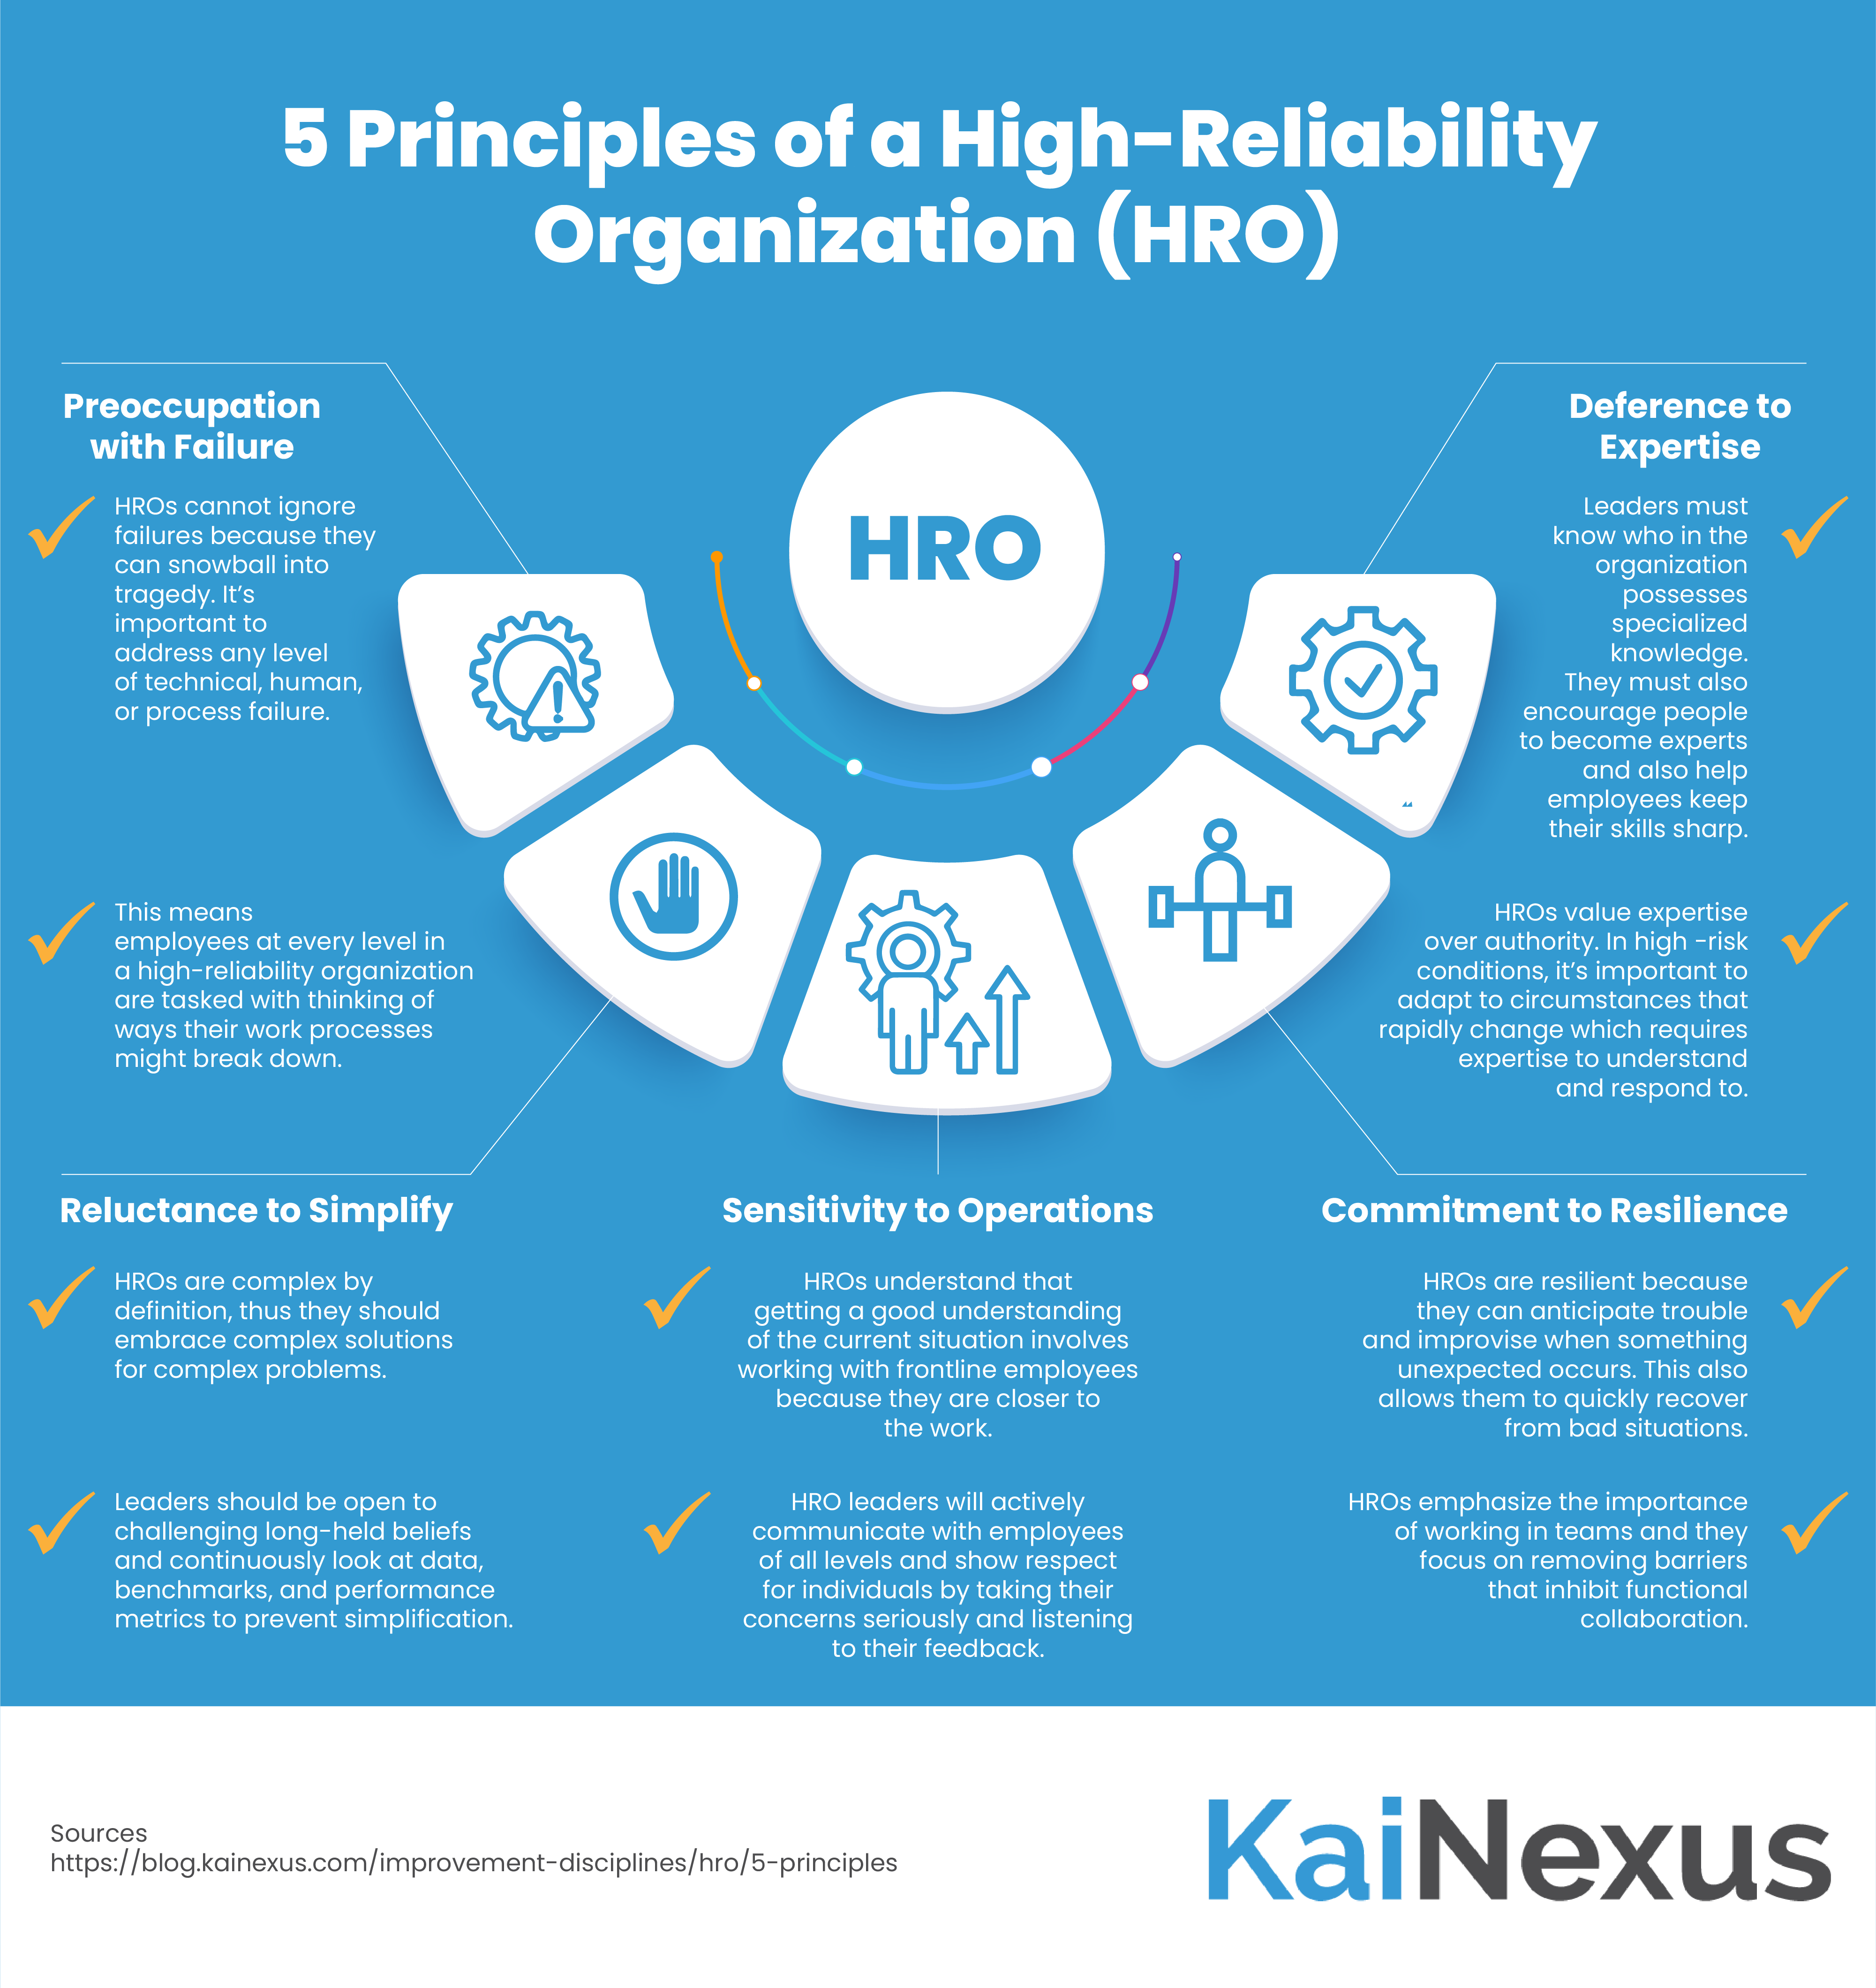 5 Principles of a High Reliability Organization (HRO) Infographic